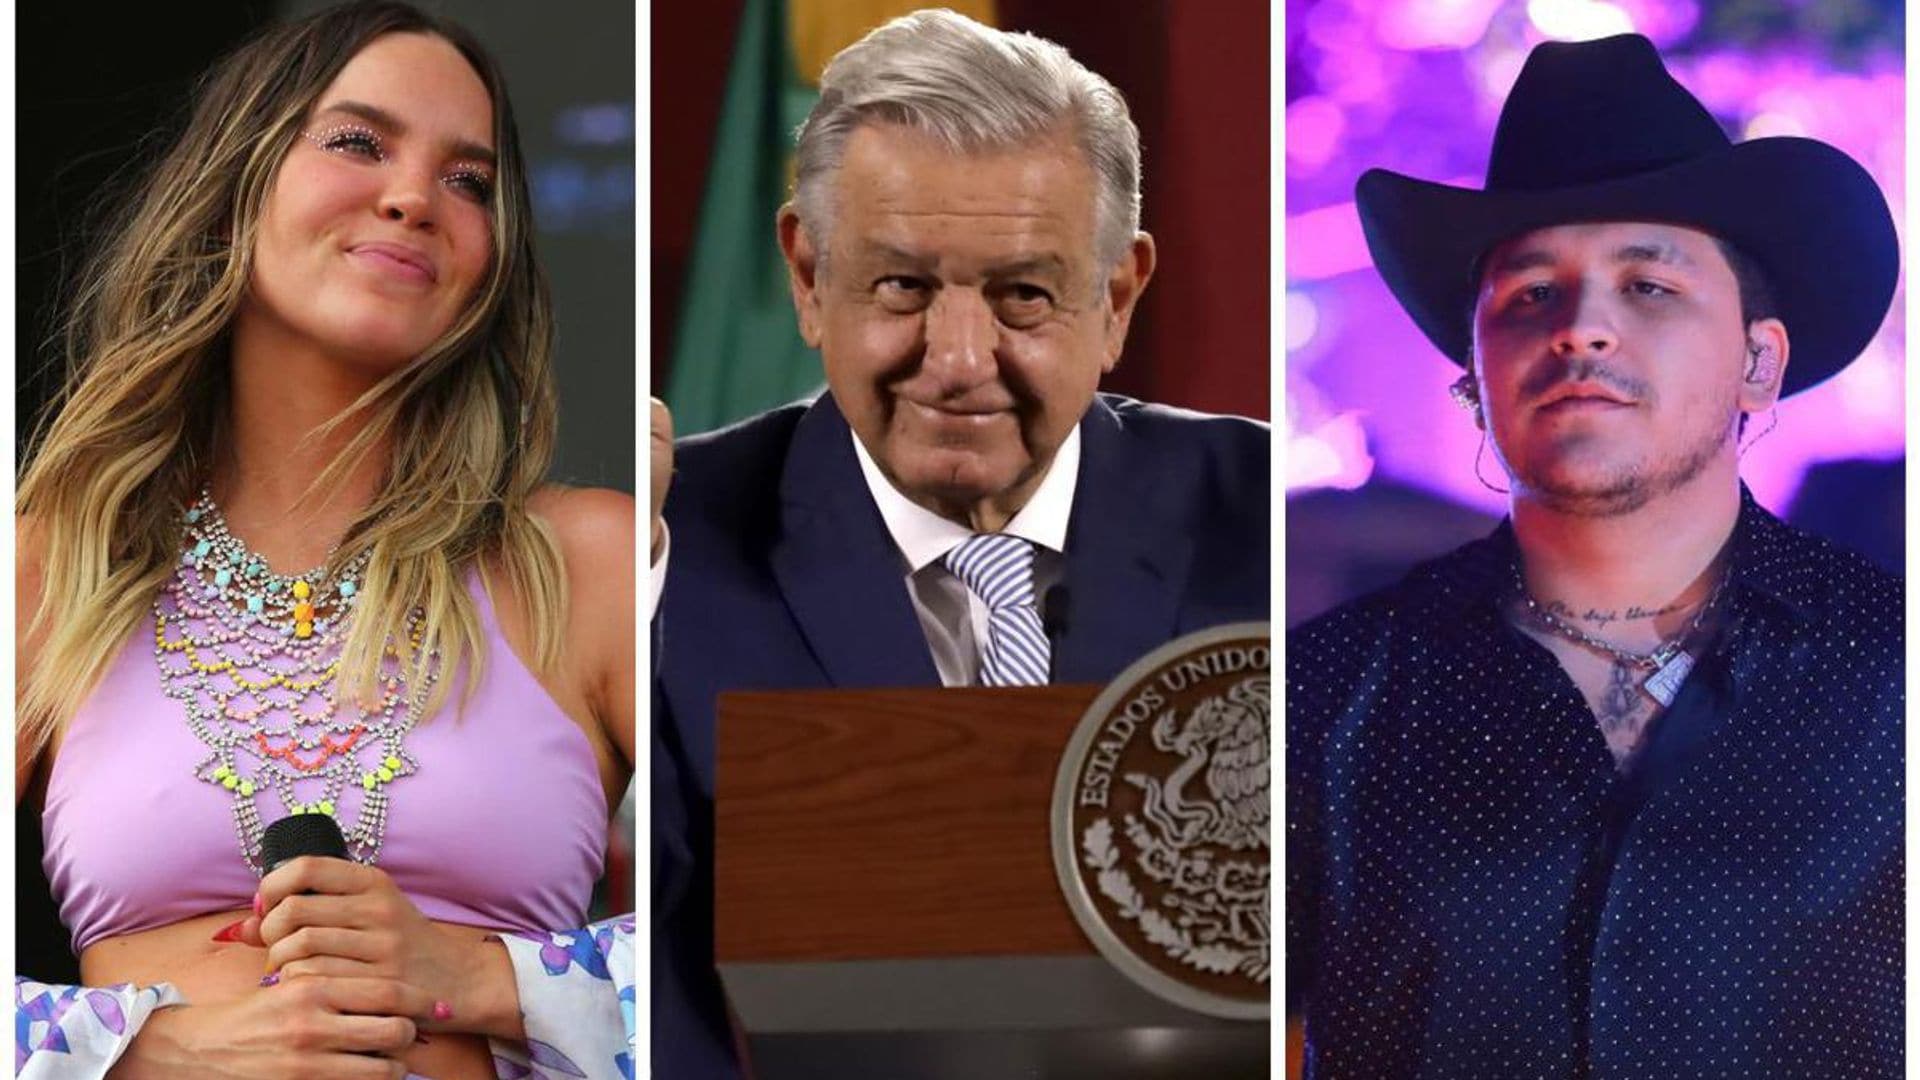 Mexico's president wants to reunite exes Belinda and Christian Nodal in a massive free concert at the Zocalo